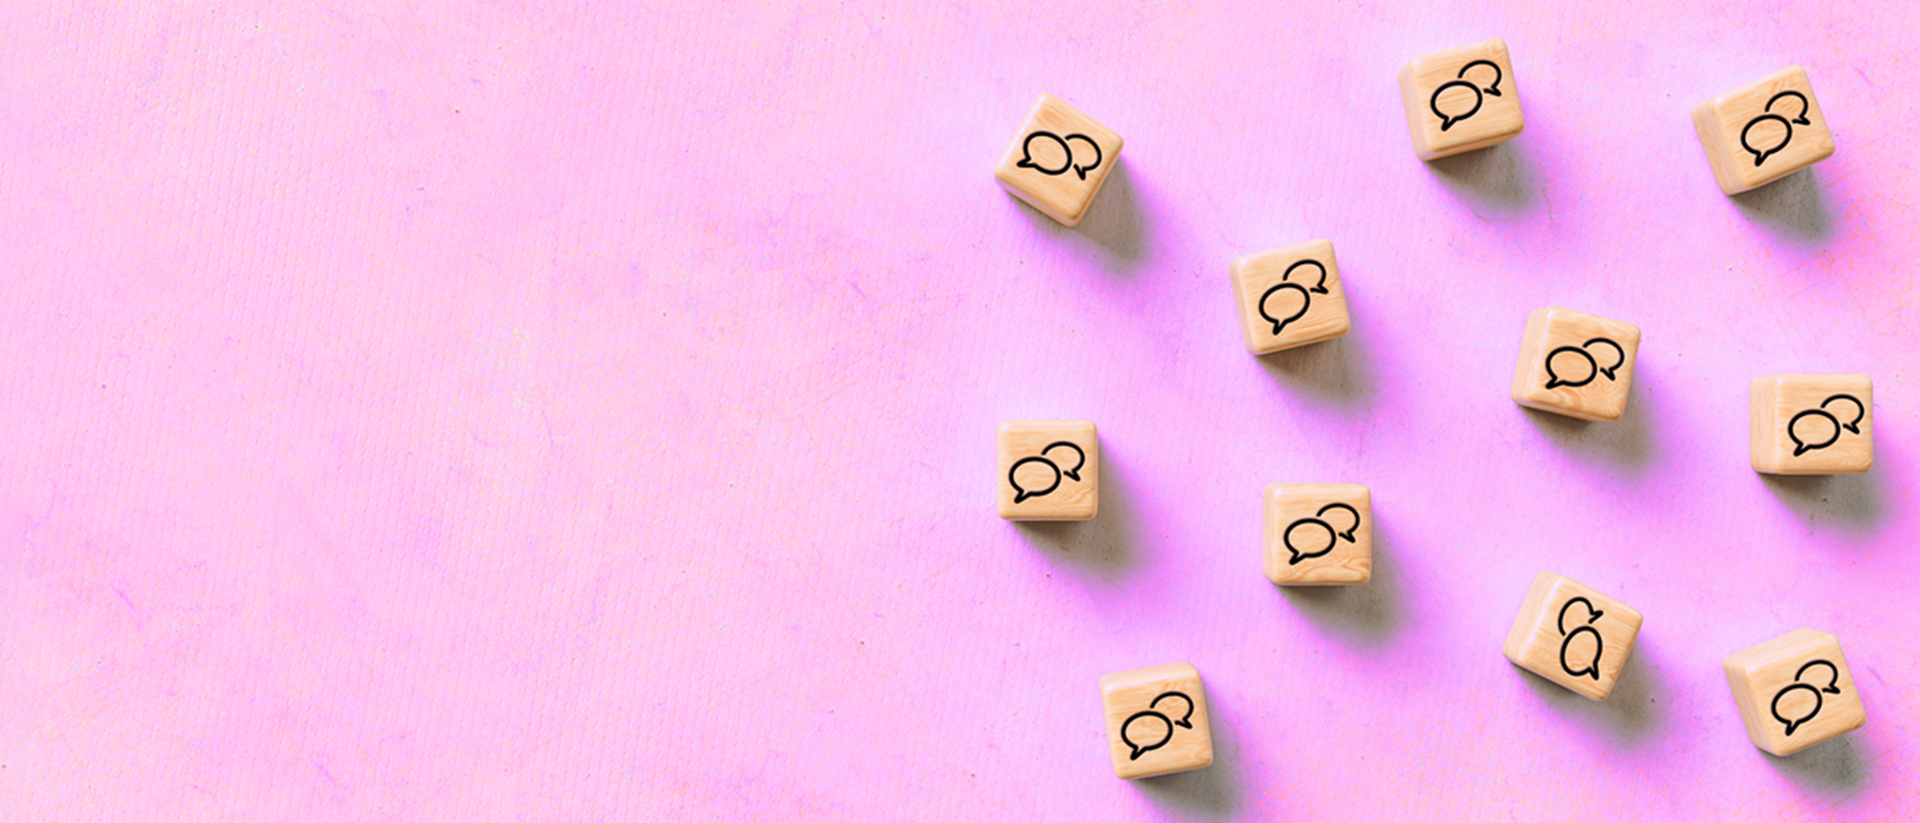 Image of wooden cubes with speech bubbles on a pink background